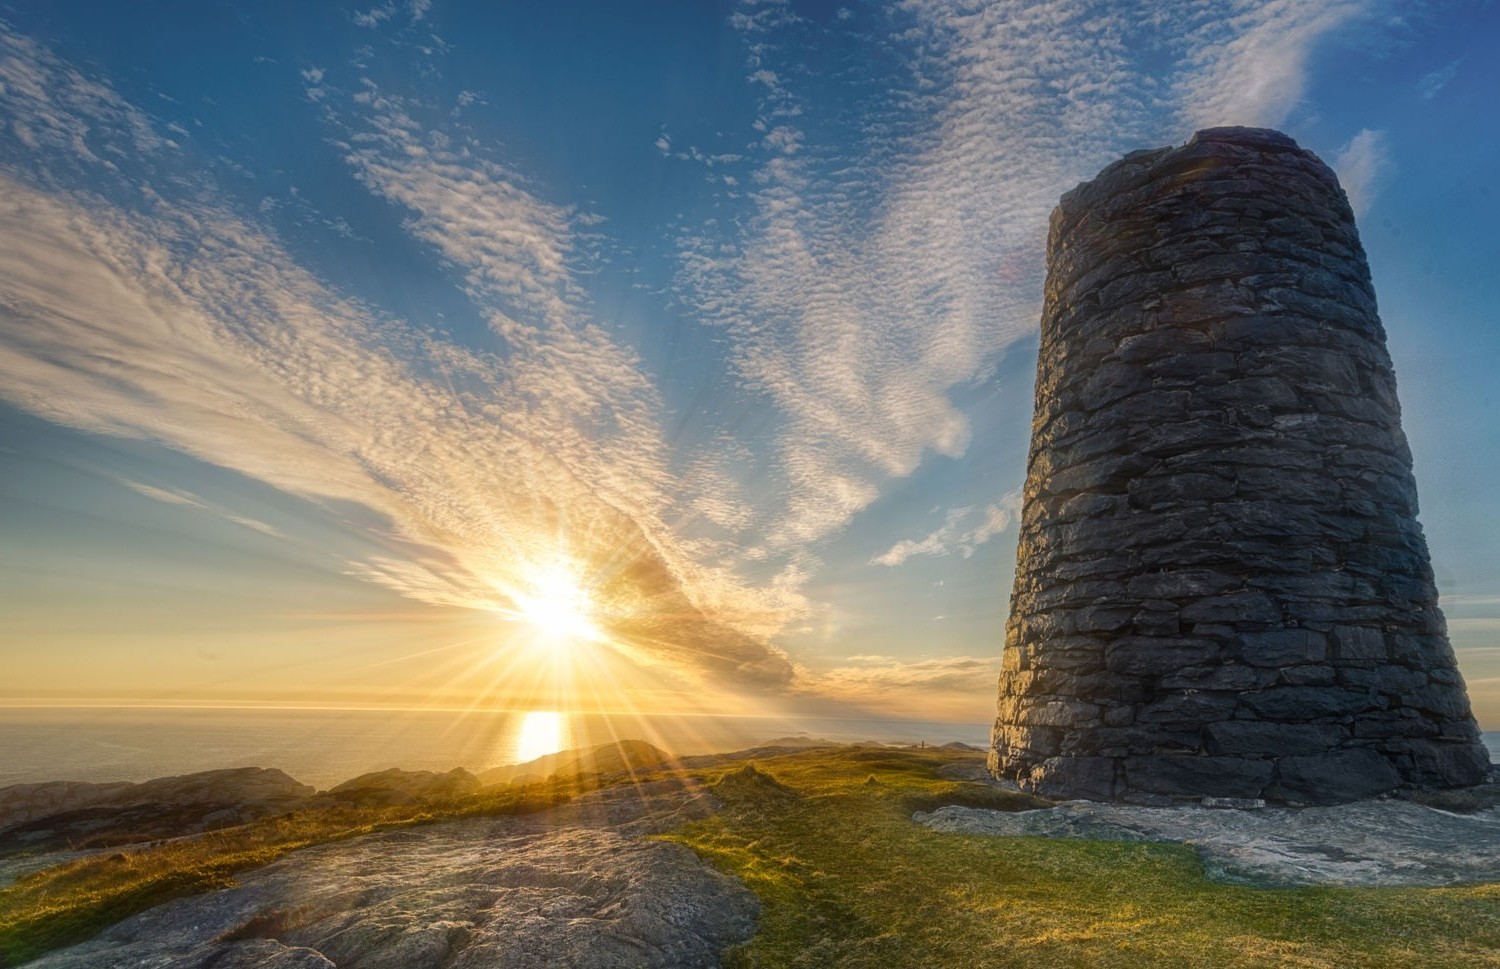 photography, Landscape, Nature, Stone, Tower, Sea, Sun Rays, Clouds, Sunset, Summer, Norway Wallpaper